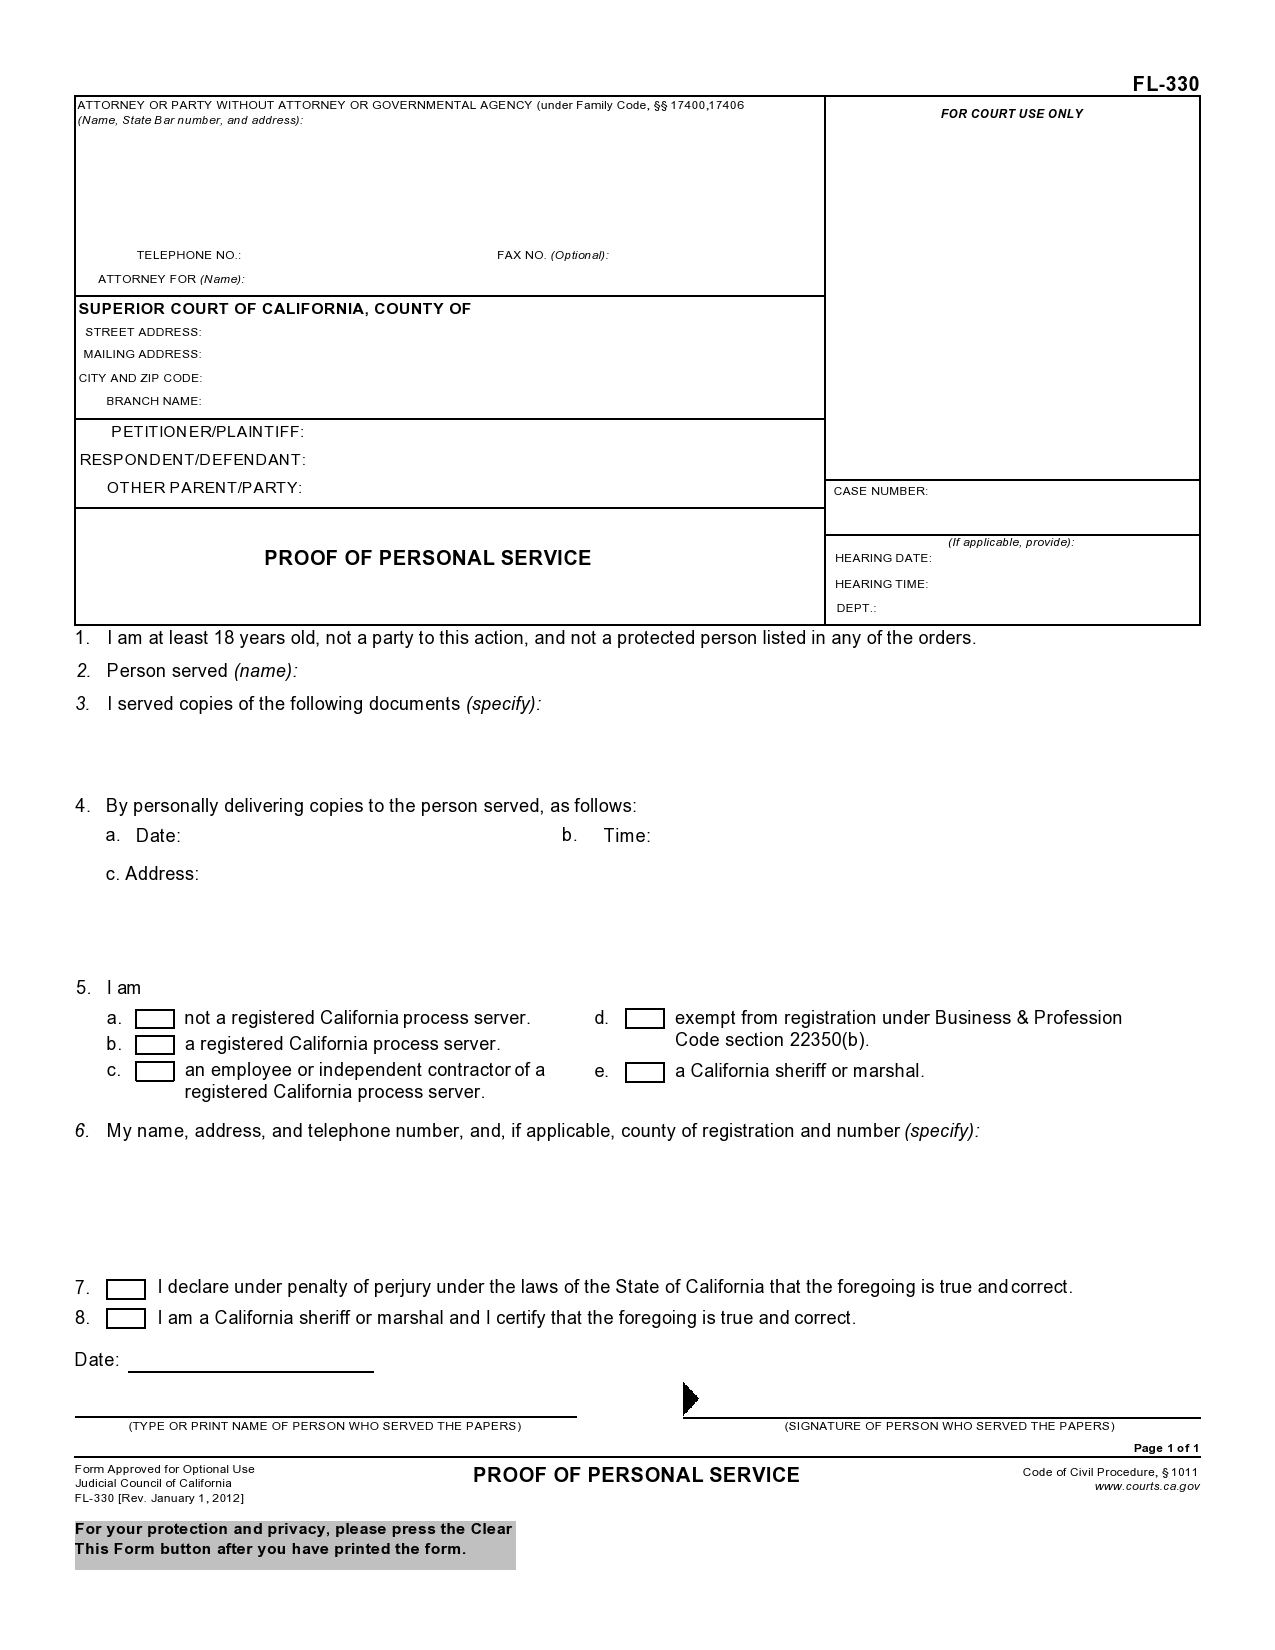 Free proof of service form 45